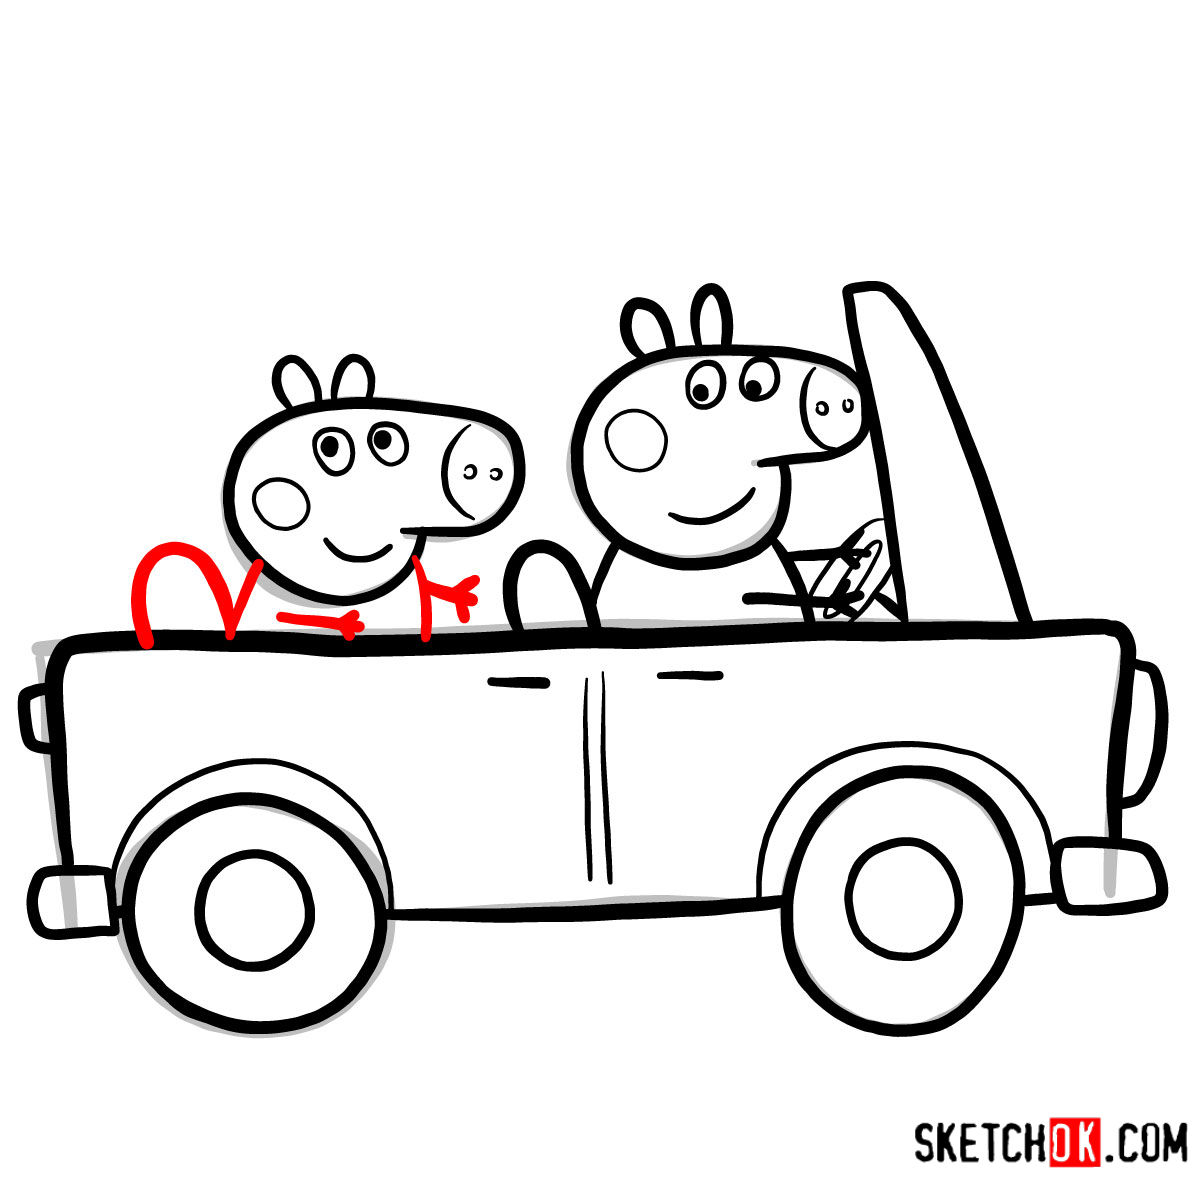 How to draw George Pig with Mummy Pig riding a car - step 11